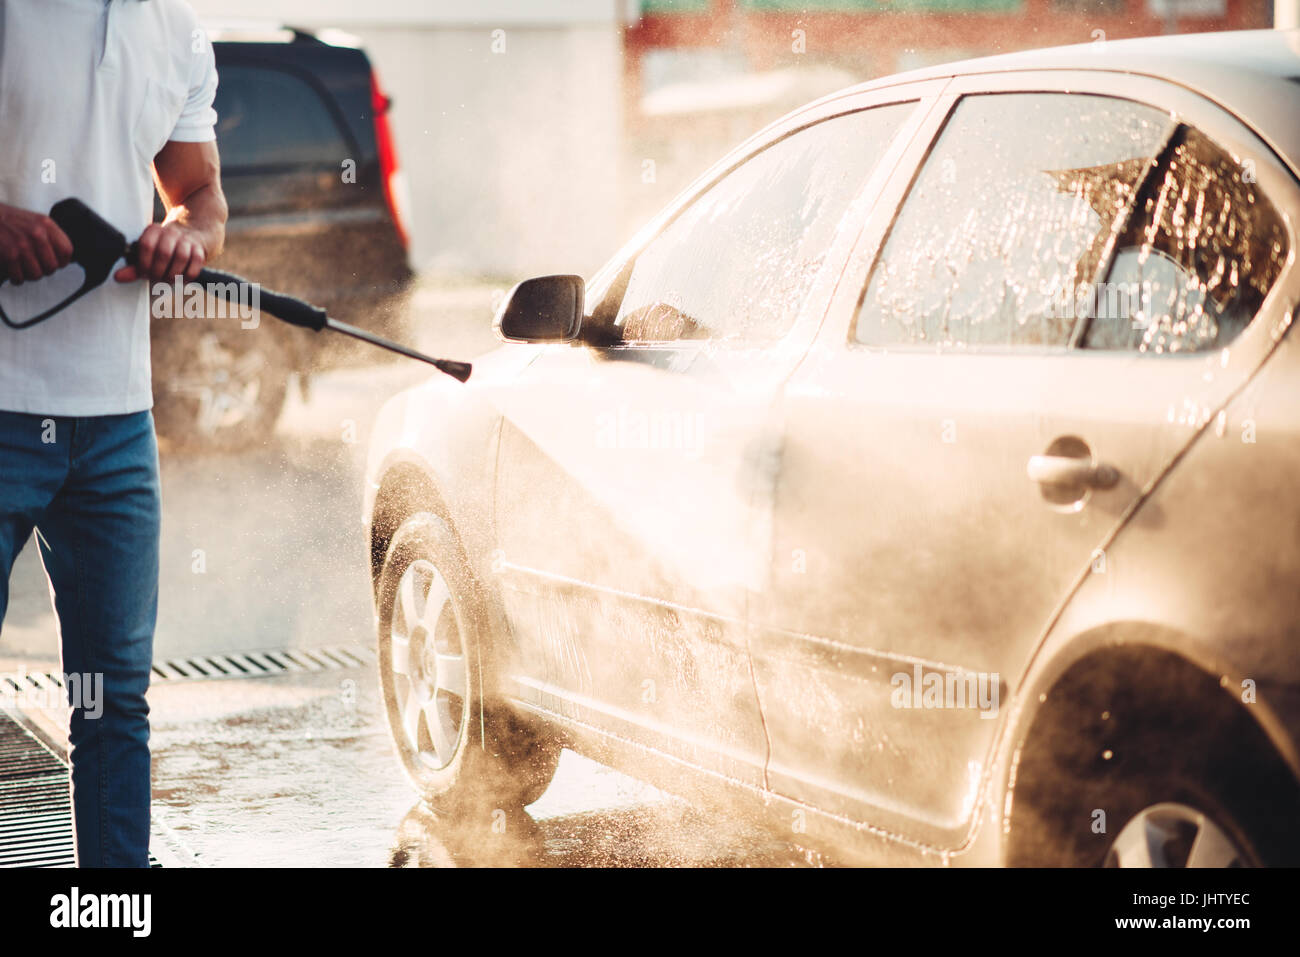 Male worker wash the car with high pressure washer. Car-wash station Stock Photo